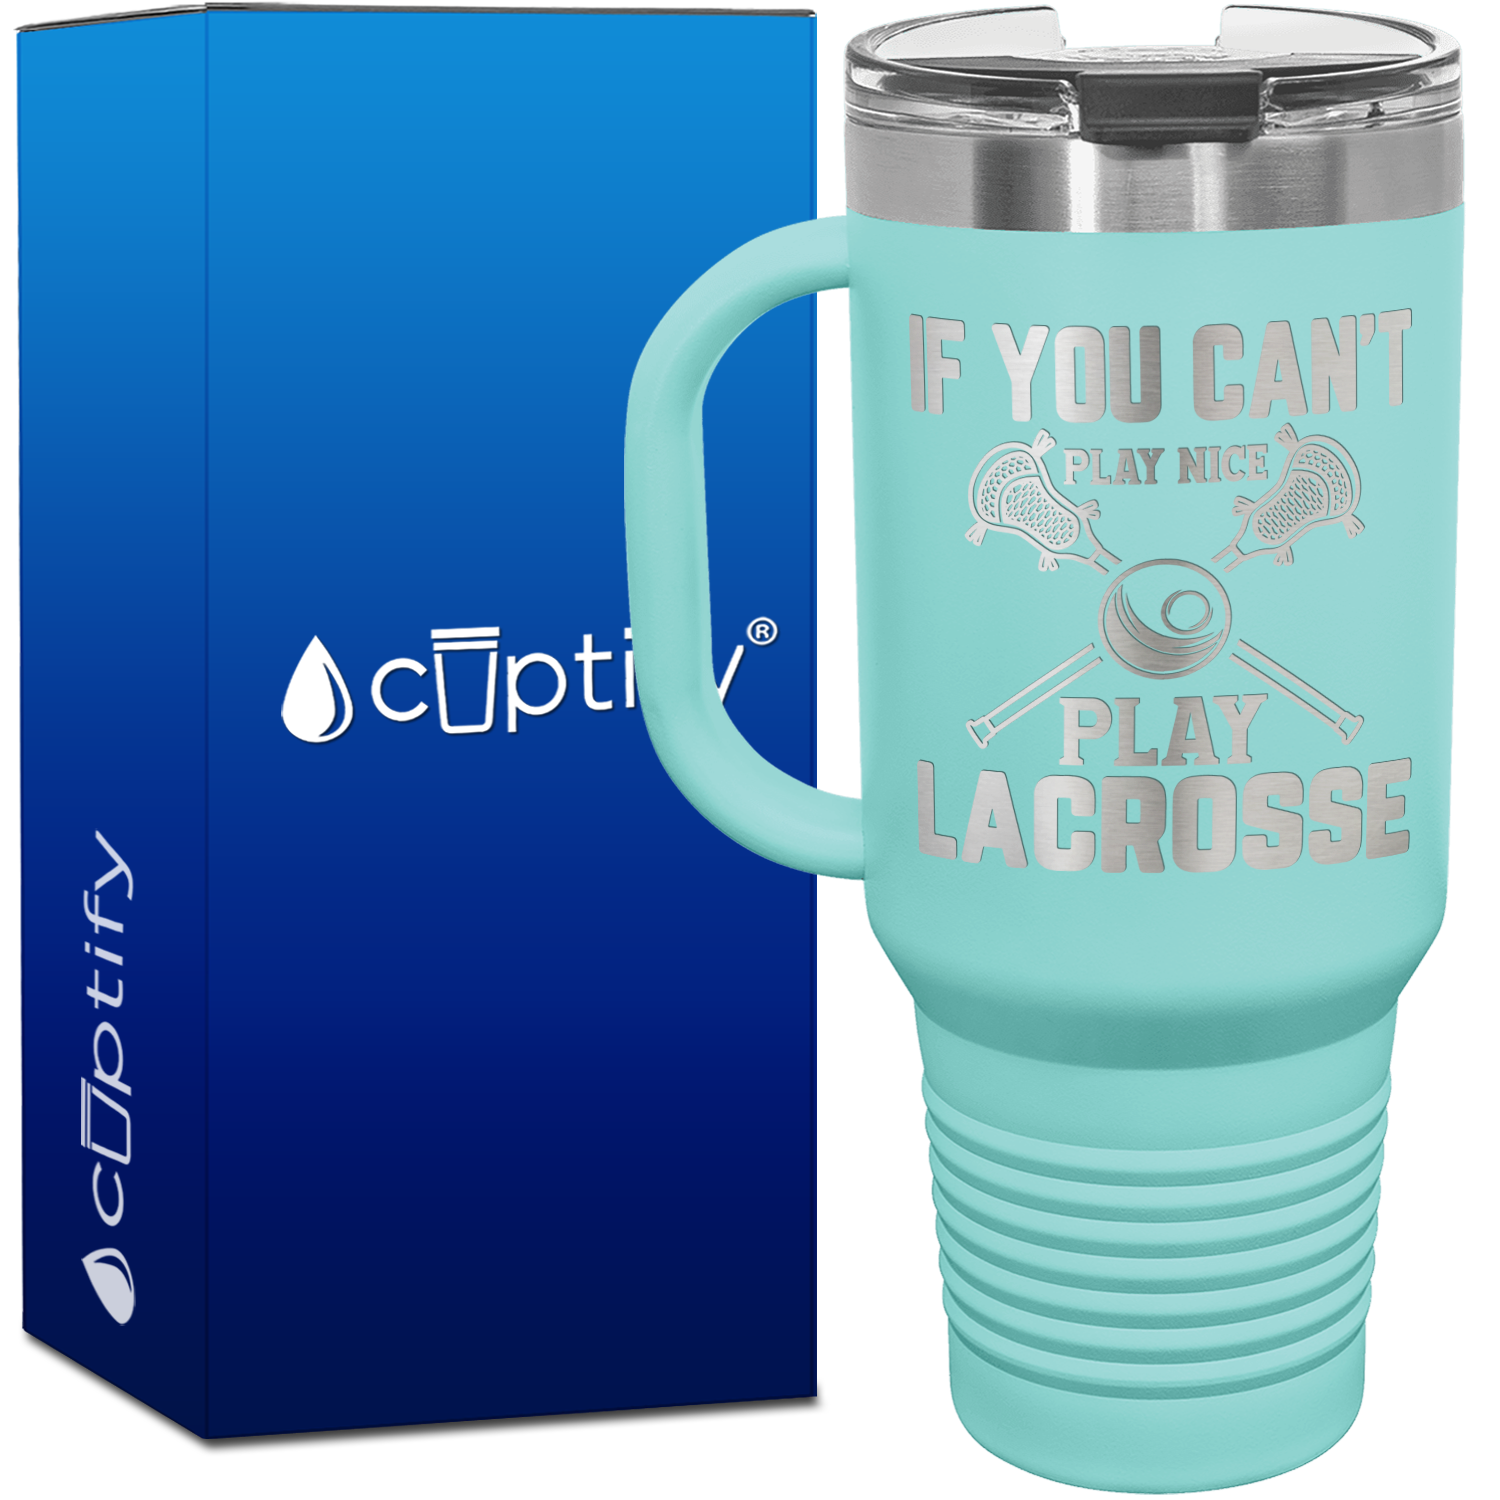 If You Can't Play Nice Play Lacrosse  40oz Lacrosse Travel Mug